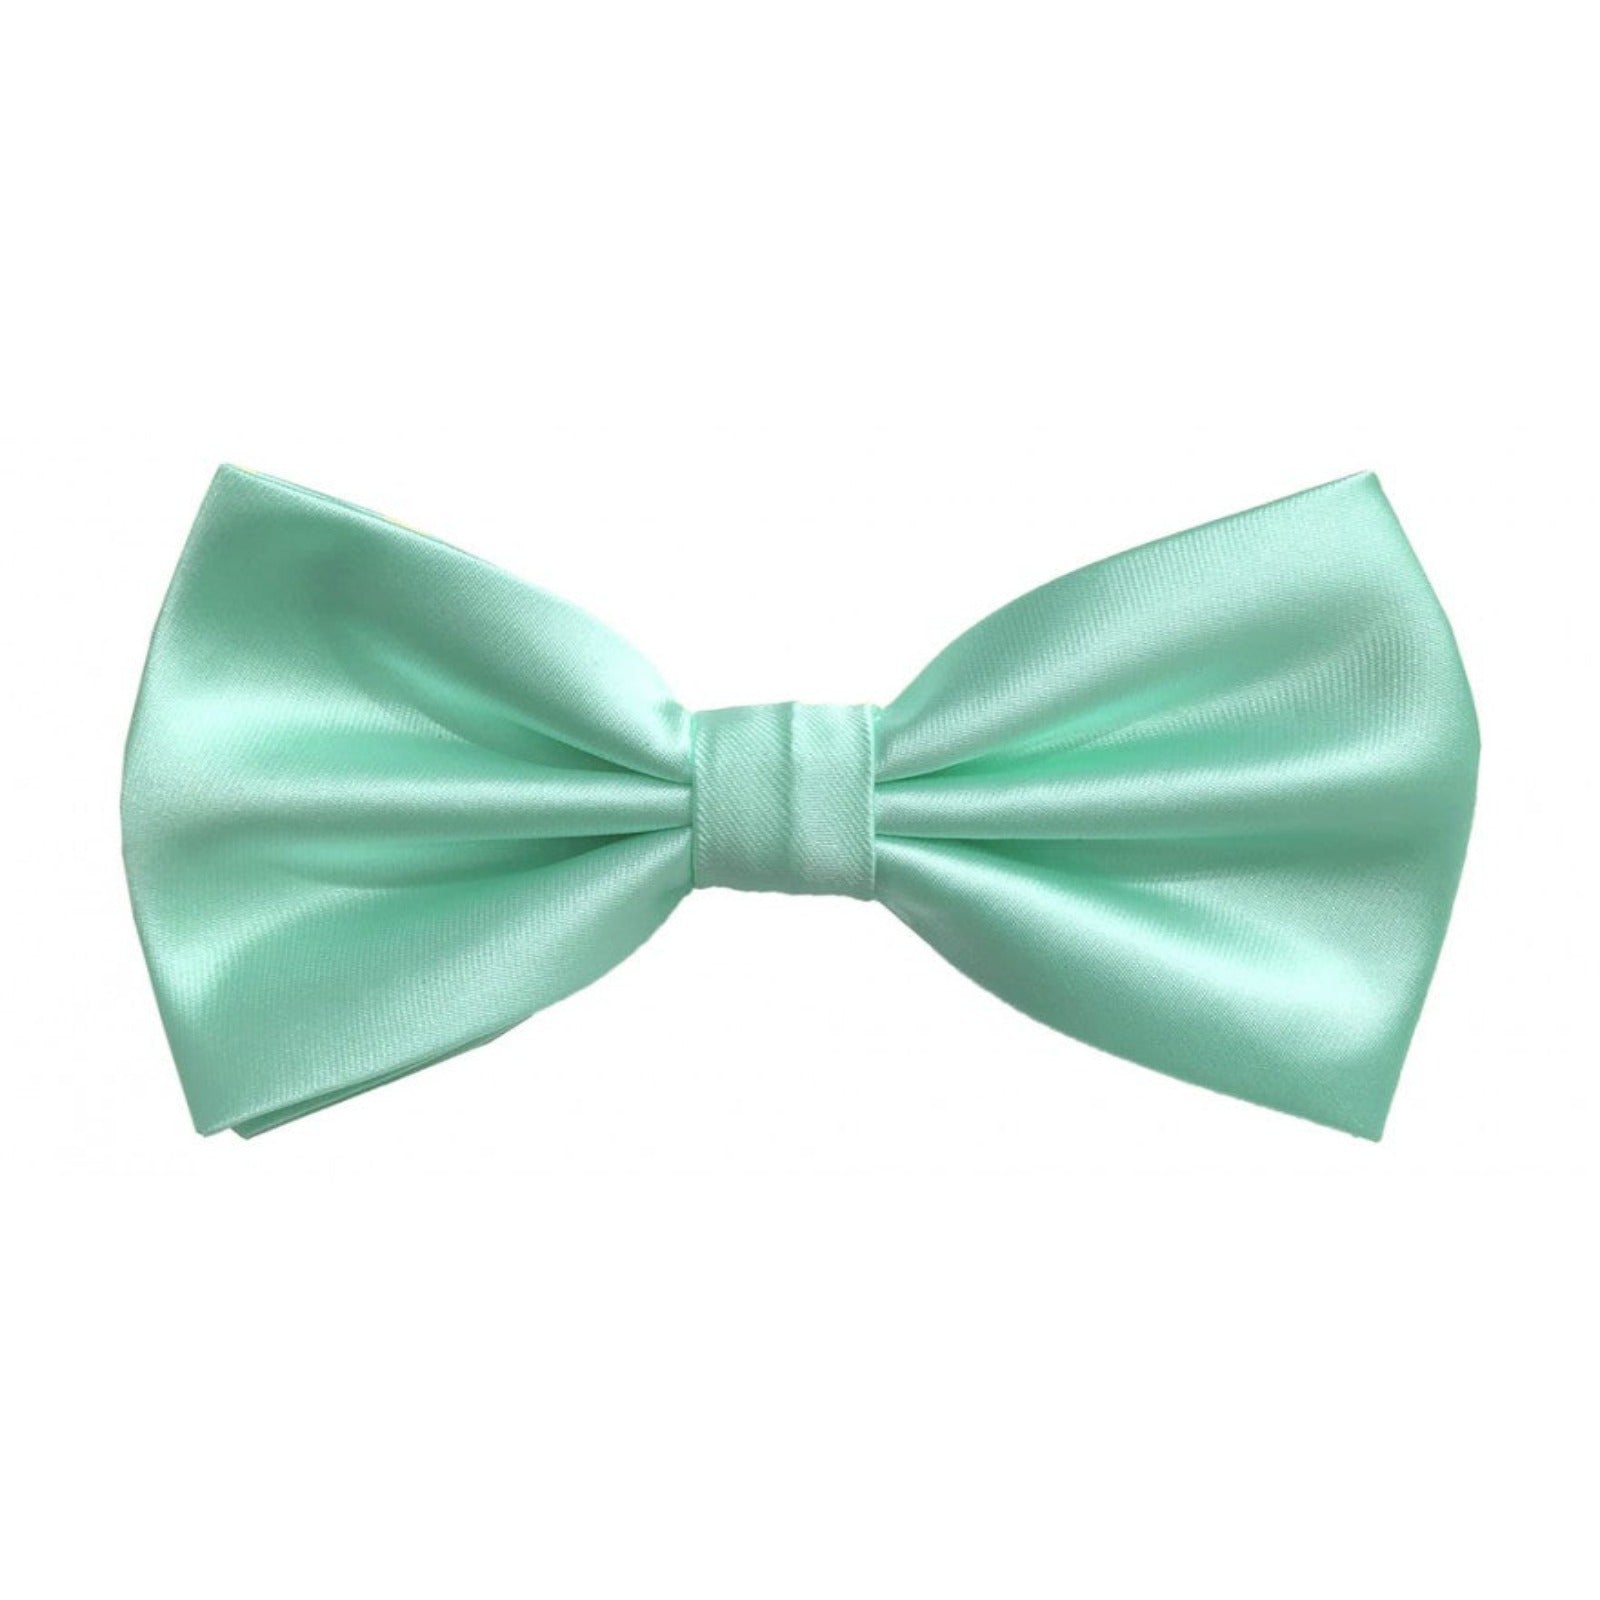 Classic Aqua Wedding Bundle Offer - Save on Bowties and Ties for Grooms ...